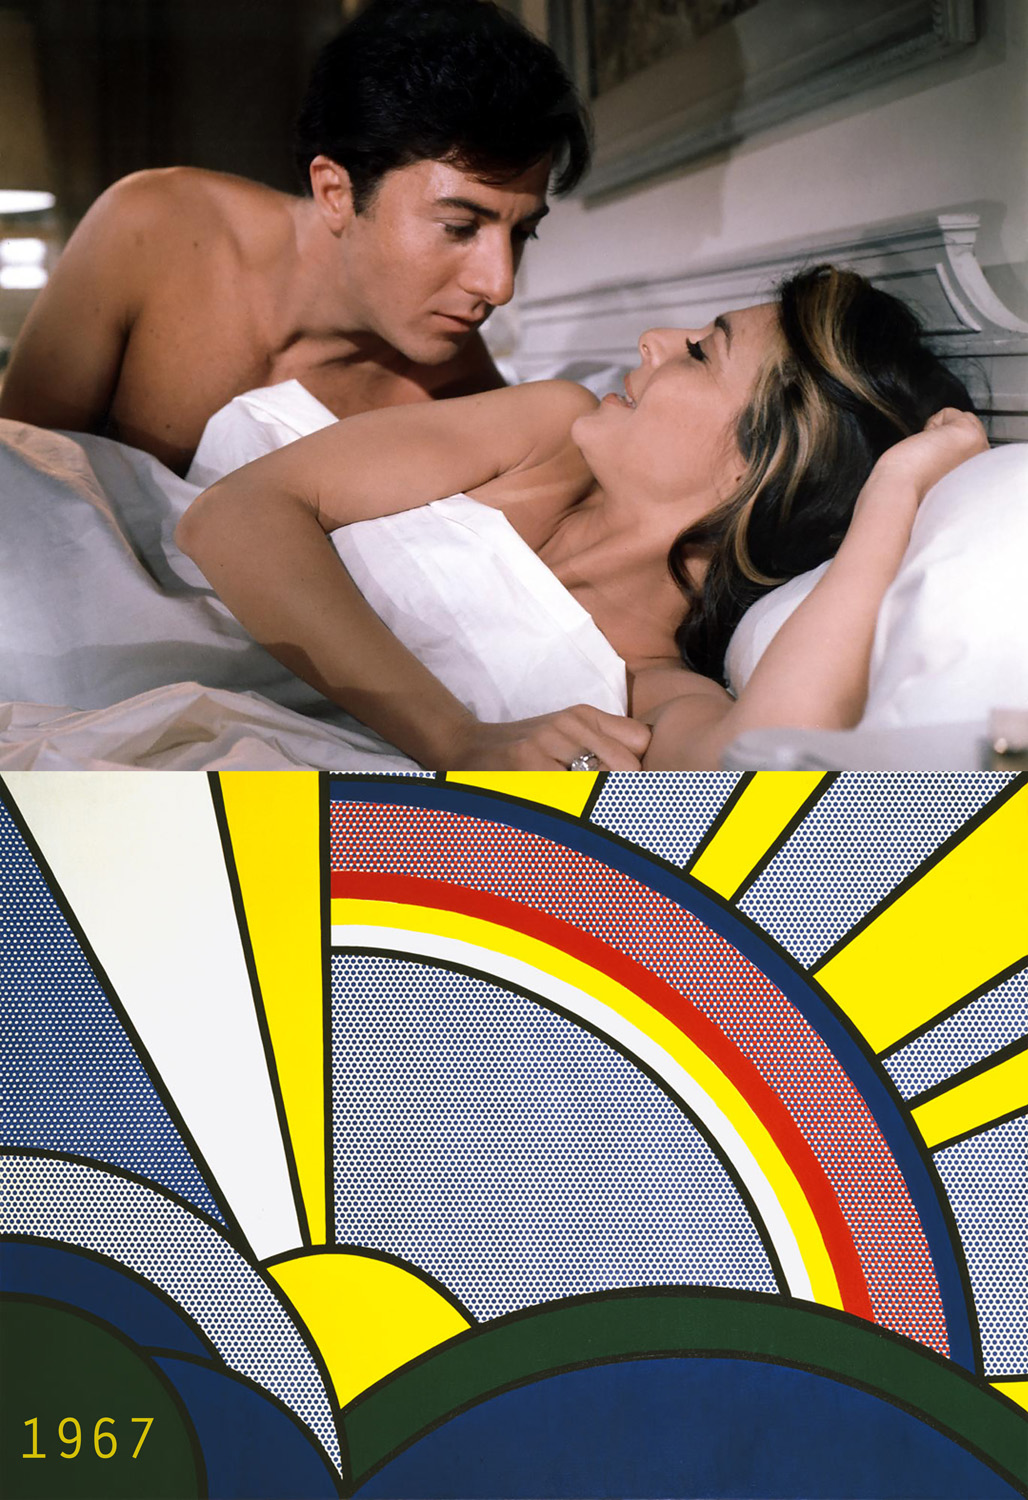 1967 The Graduate – Roy Lichtenstein Modern Painting with Sun, 2018, Giclee Archival Pigment Print, 67 x 48.25 in.